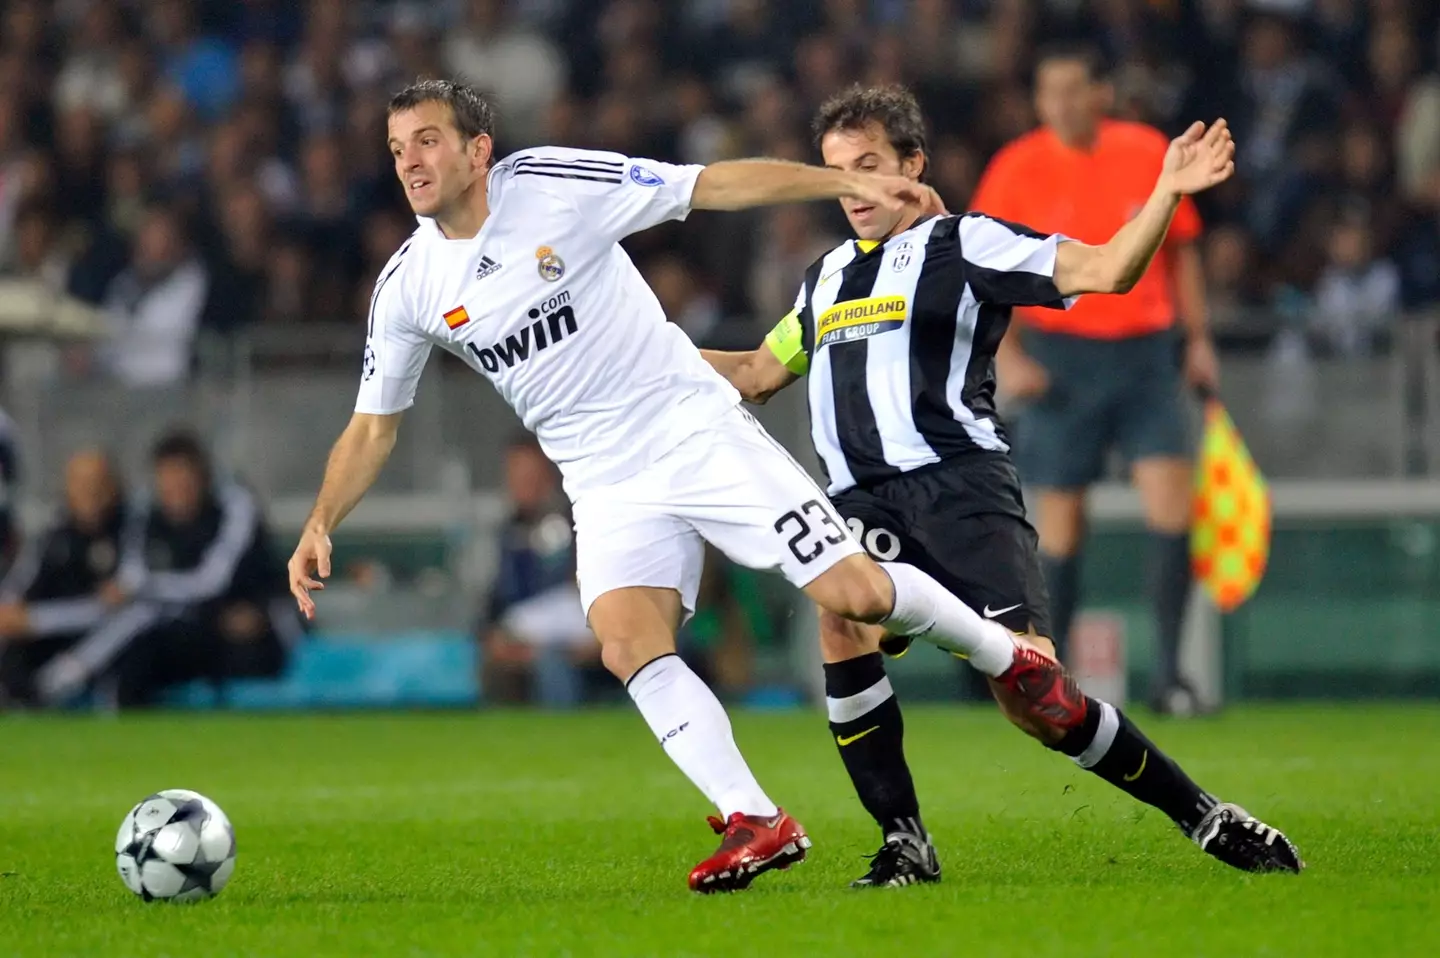 Van der Vaart wearing red boots for Real Madrid. Image: PA Images